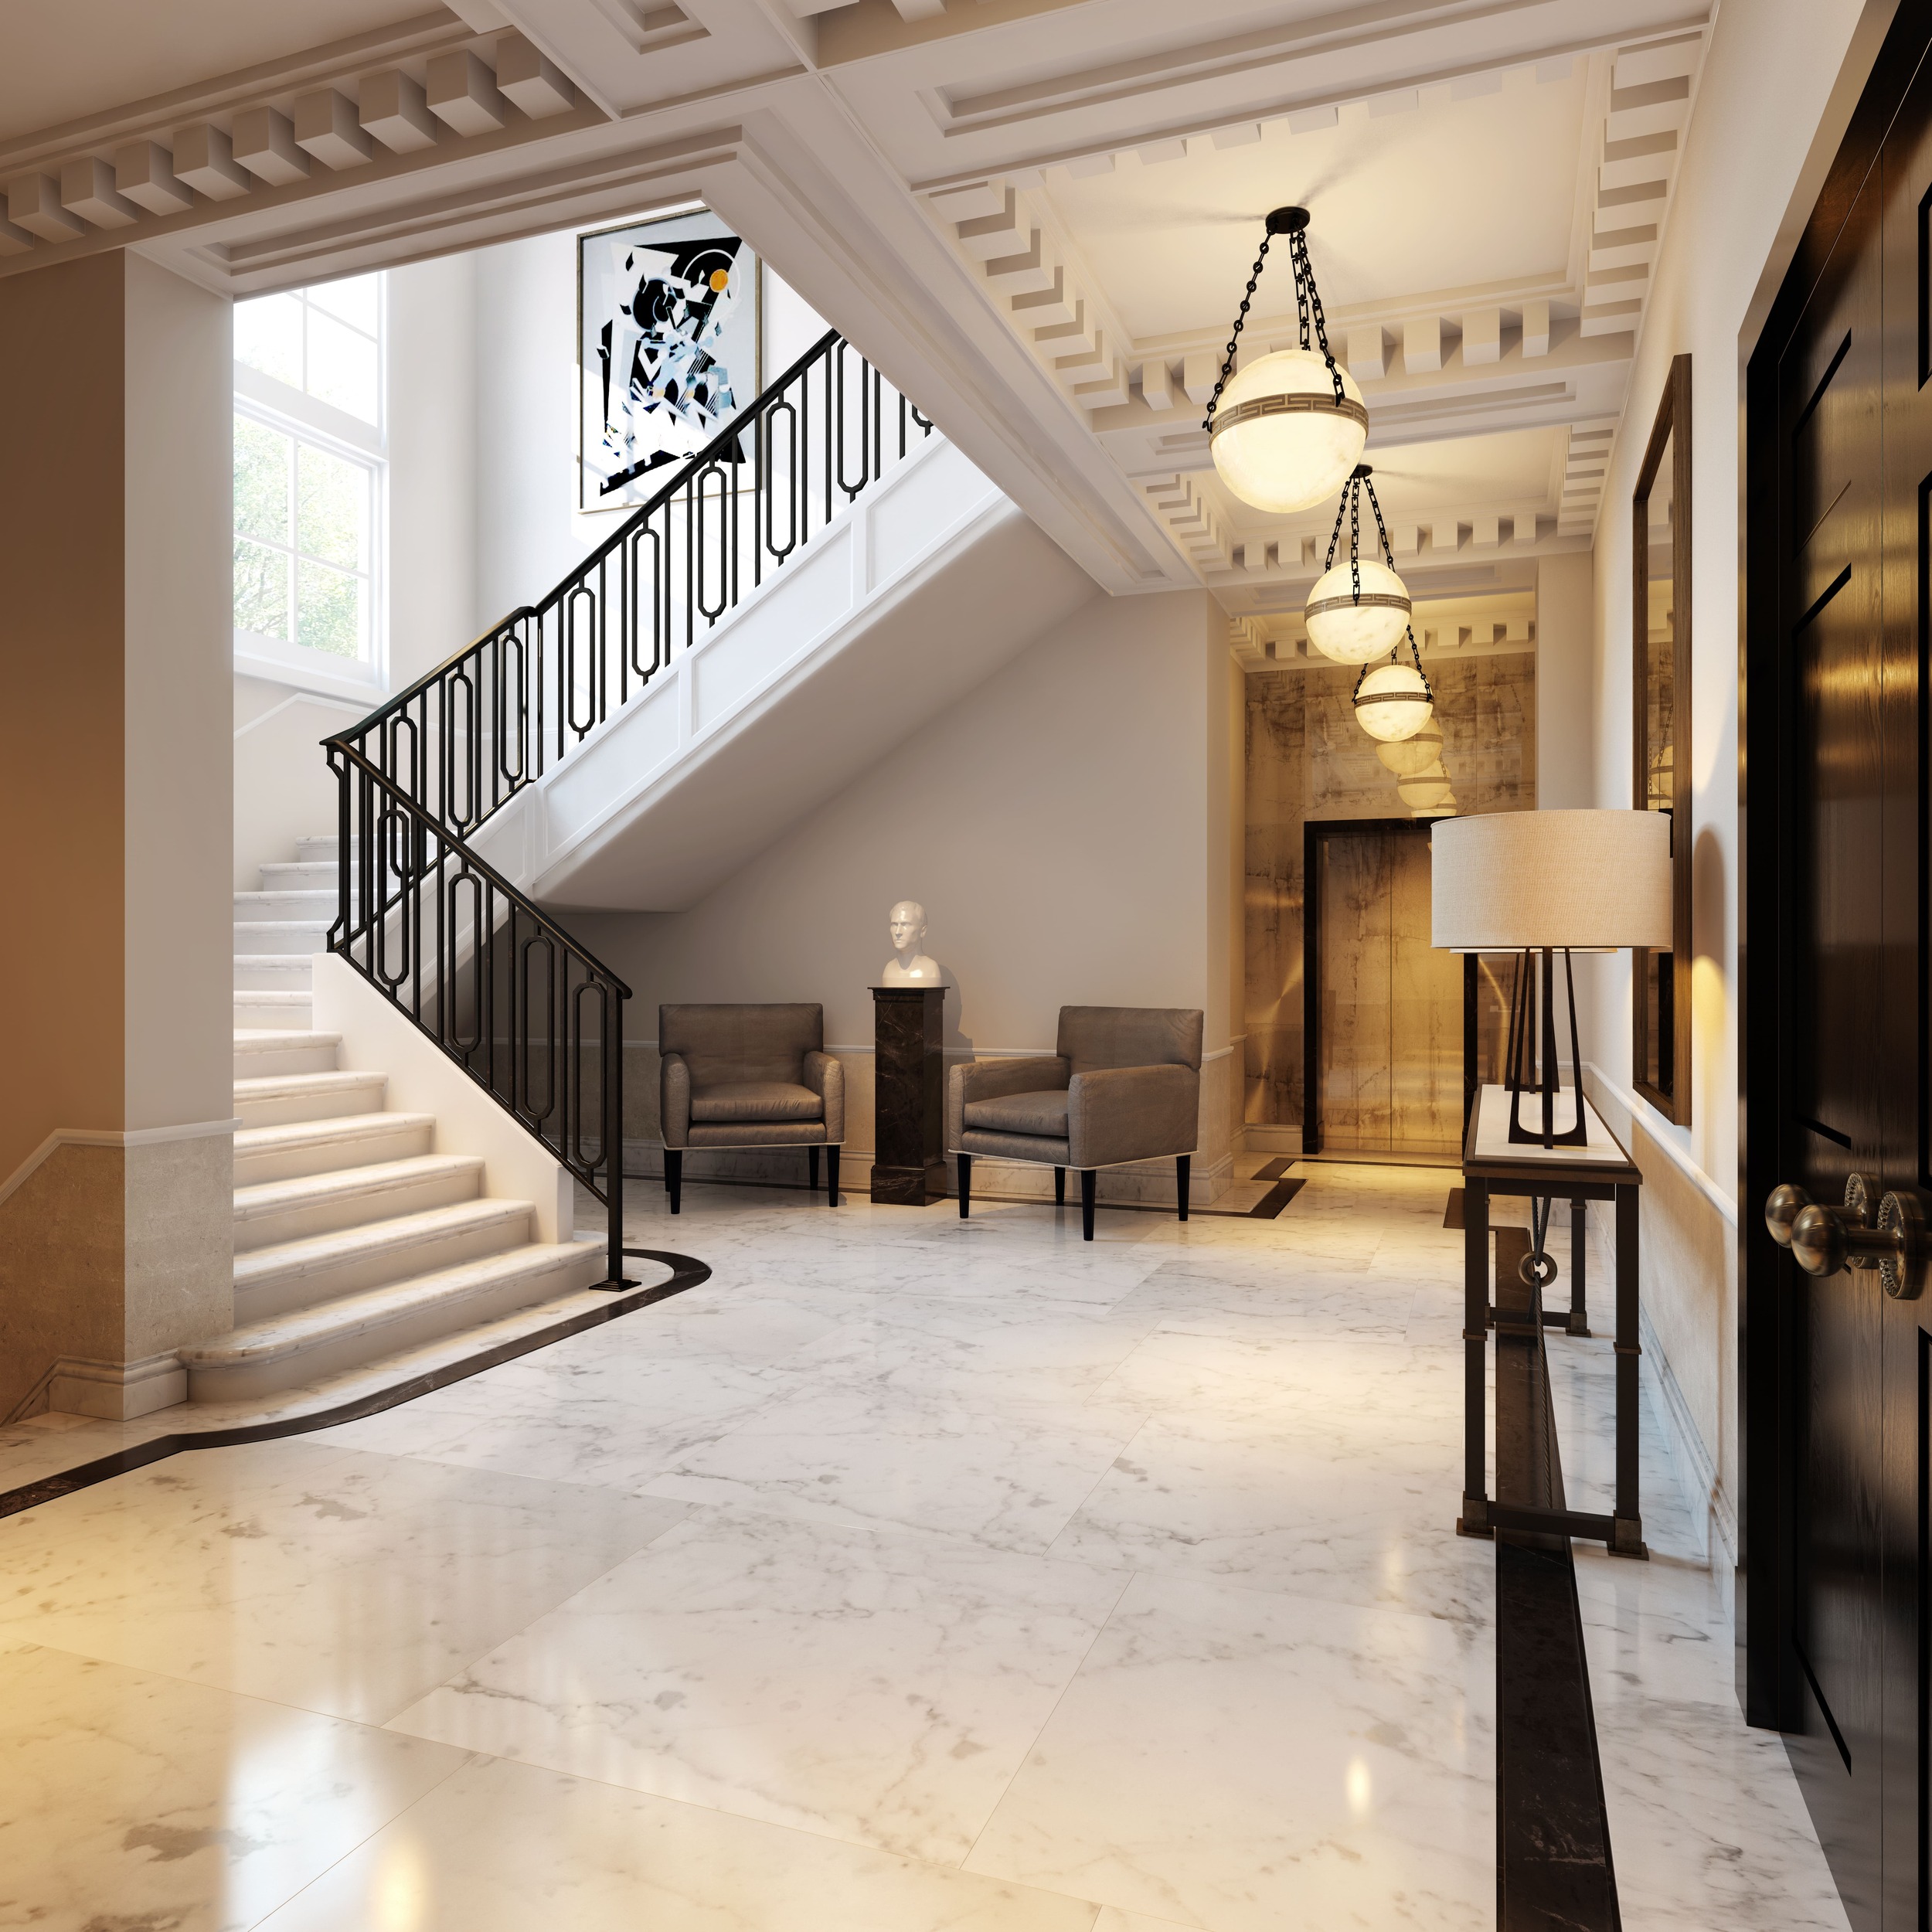 Marble floored hallway and grand staircase